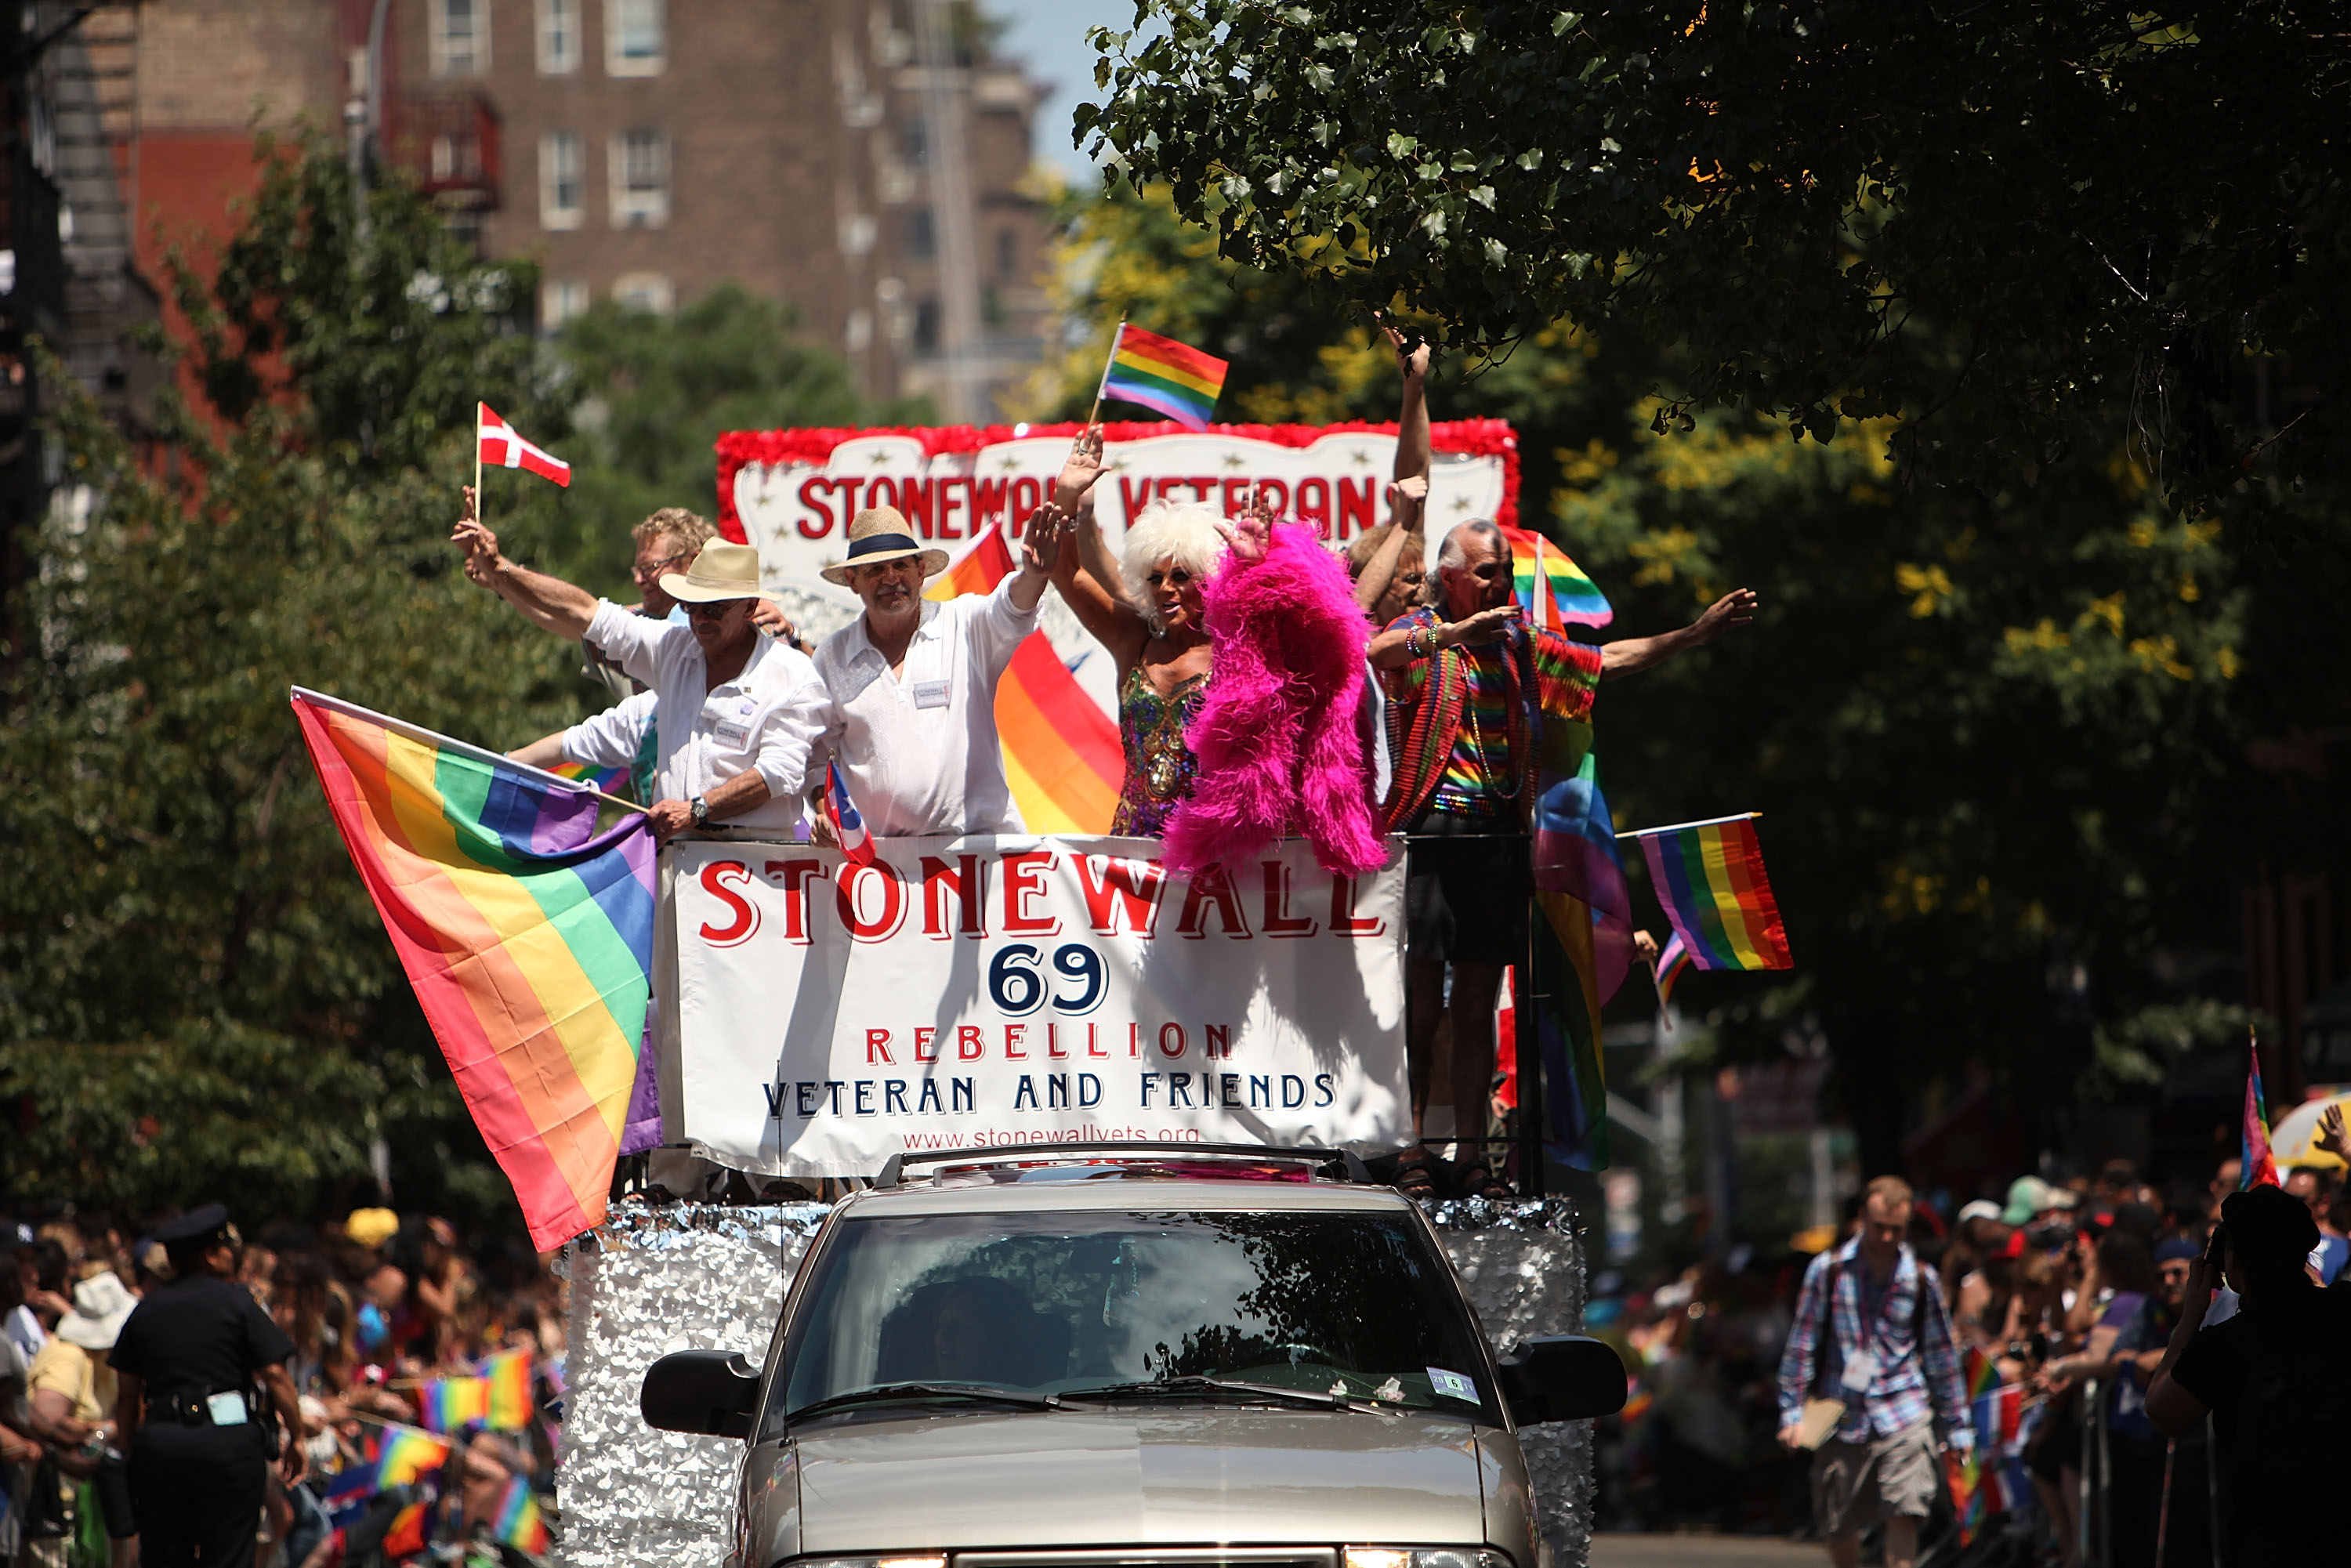 A float commemorates the 40th anniversary of the Stonewall riots, which erupted after a police raid on a gay bar, the Stonewall Inn on Christopher St., in 1969. (Spencer Platt&mdash;Getty Images)